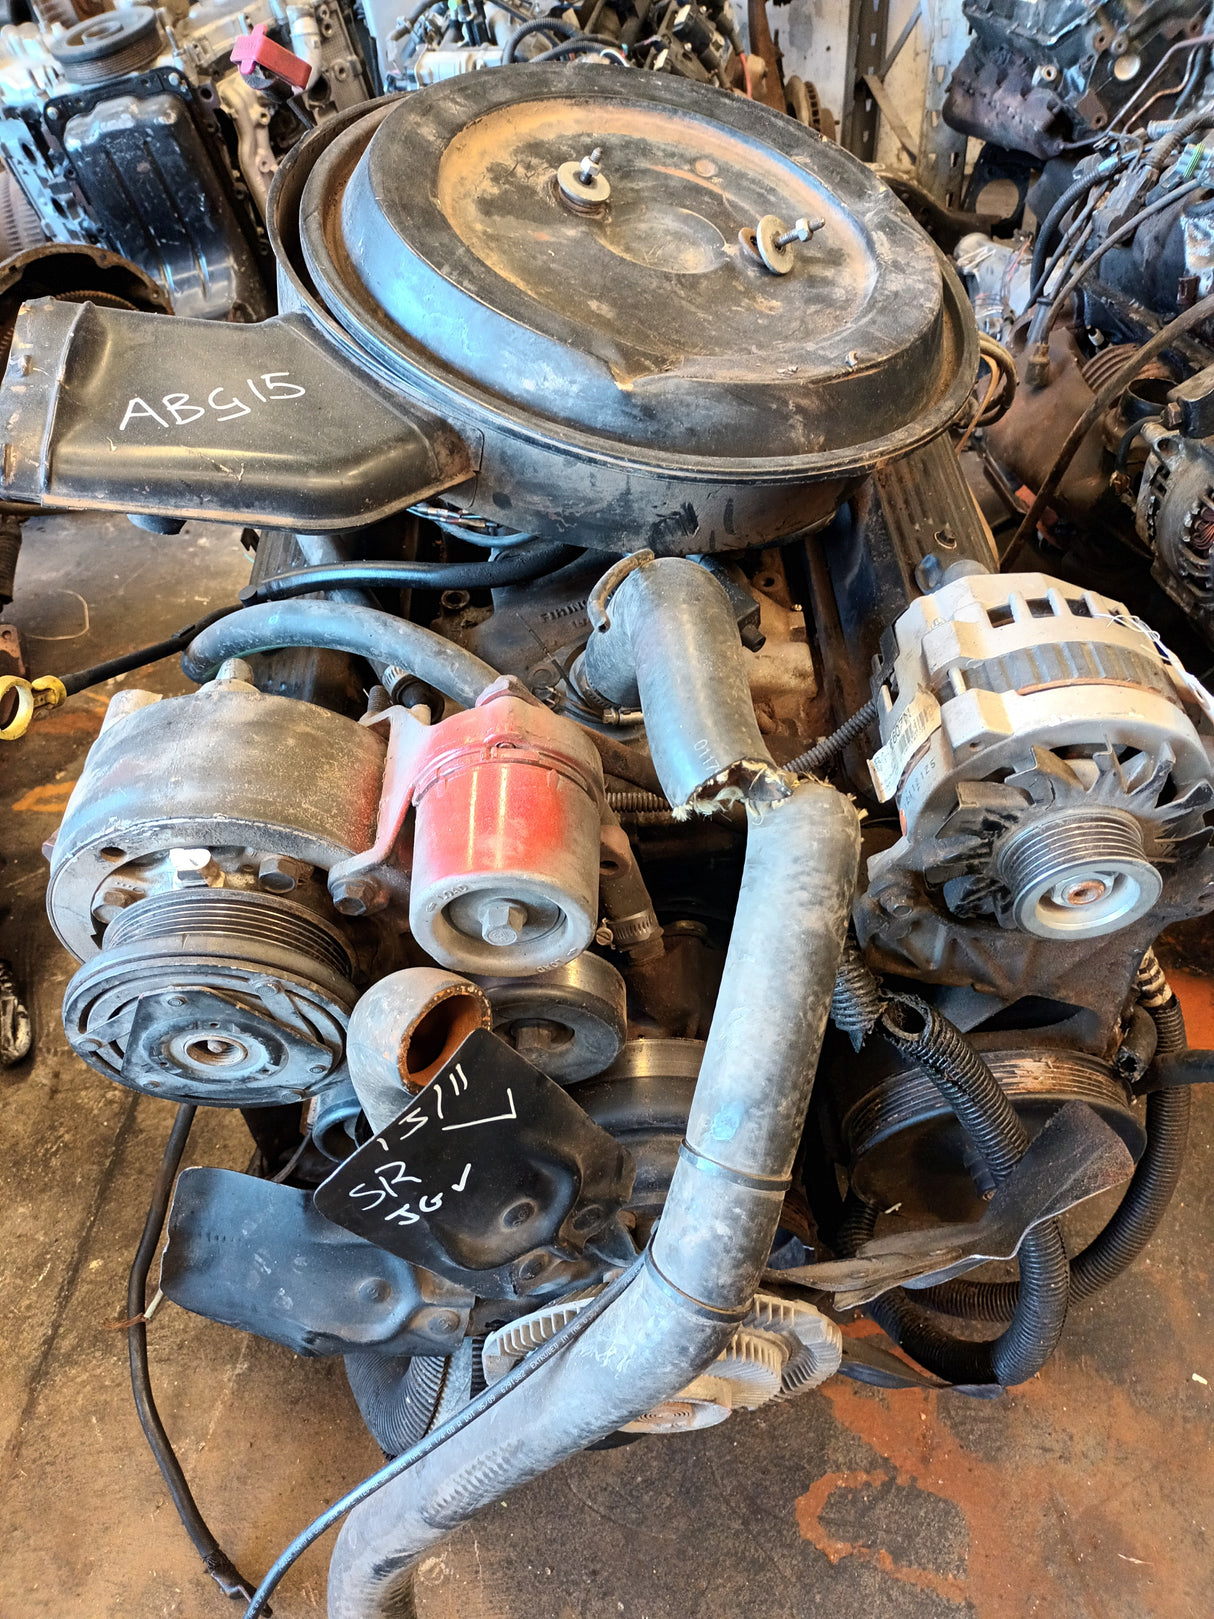 CHEV 350 LATE 1986-95 USED CONDITION GOOD FOR REBUILDING